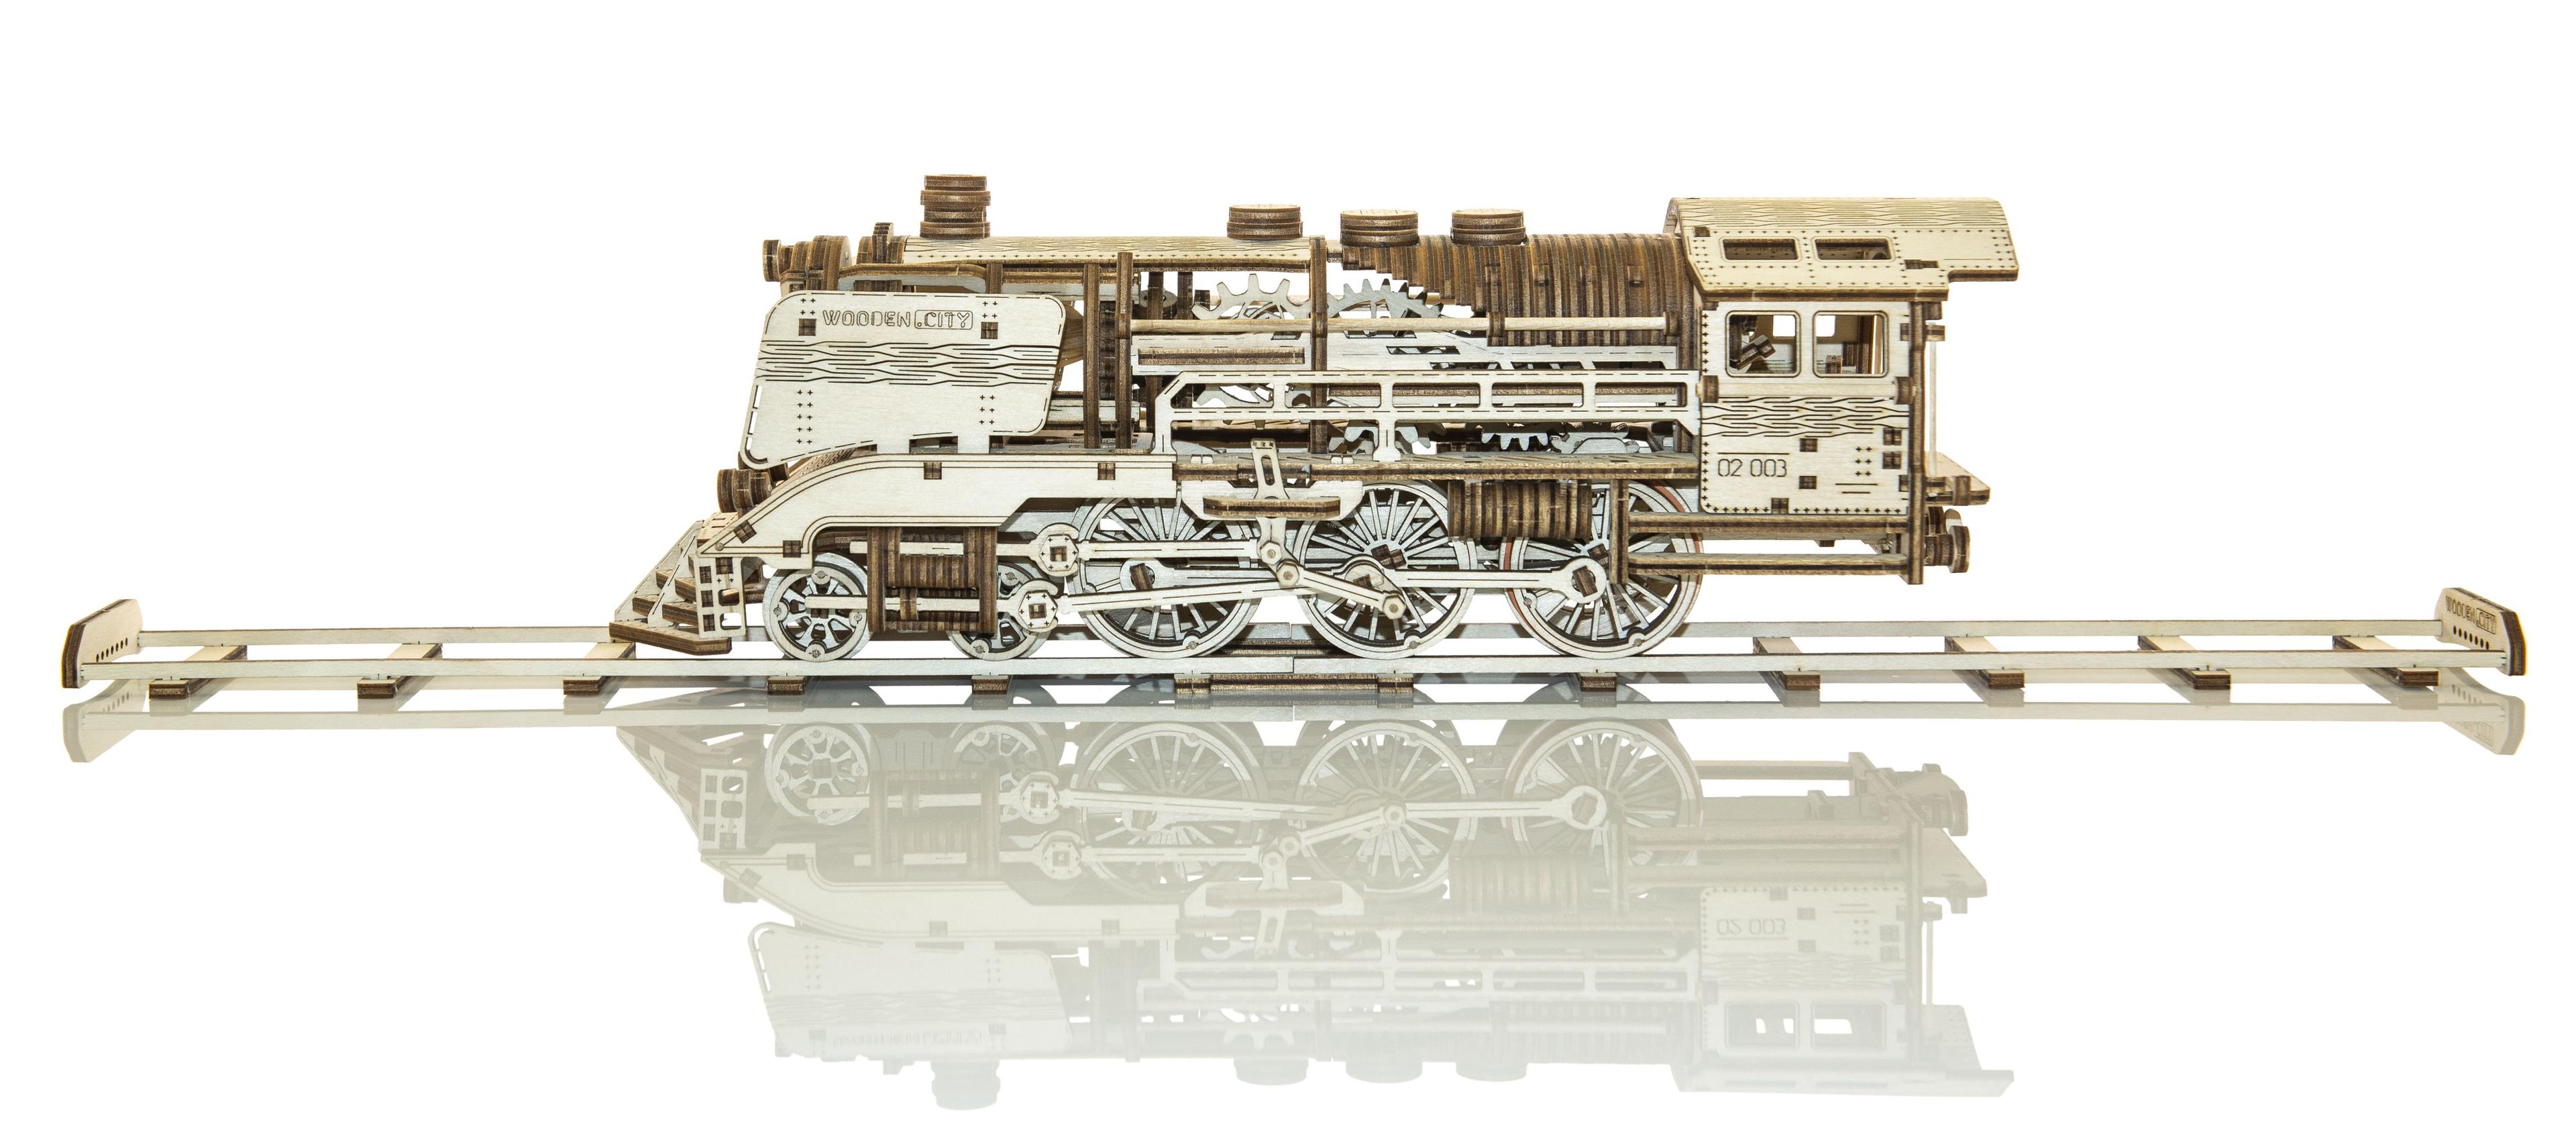 Wooden 3D Puzzle - Woden Express train with rails